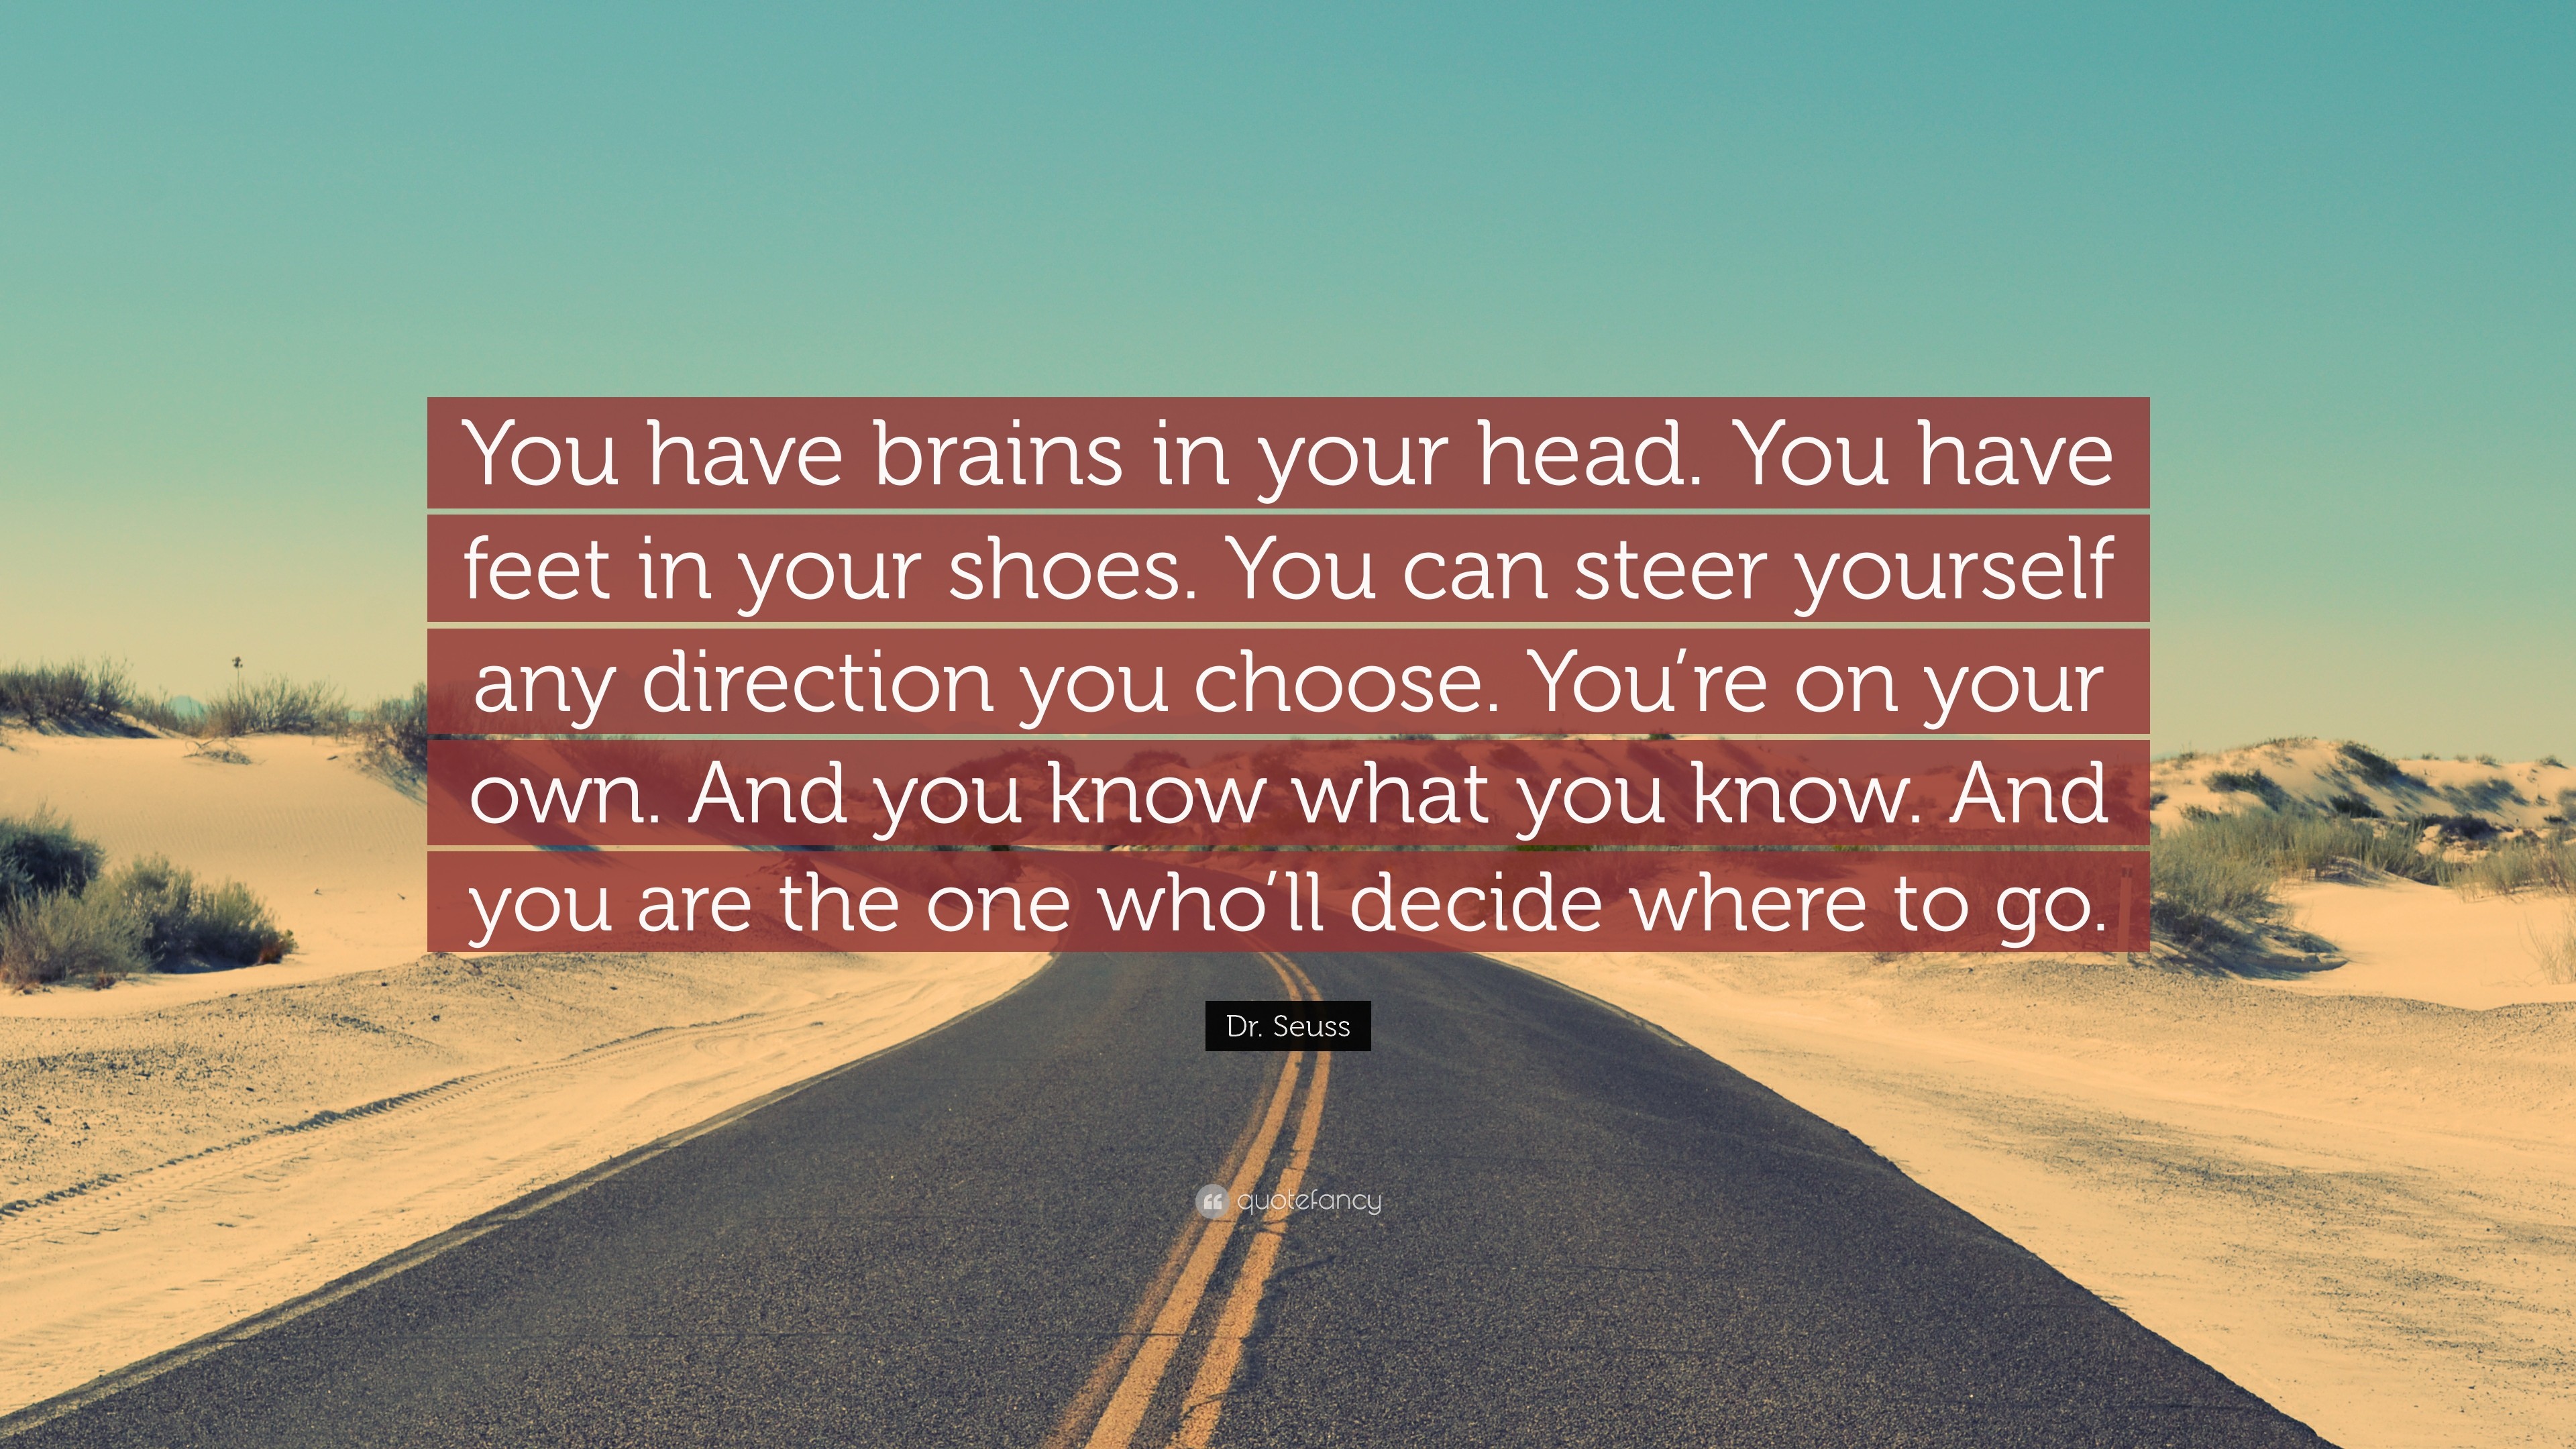 3840x2160 Dr. Seuss Quote: “You have brains in your head. You have feet